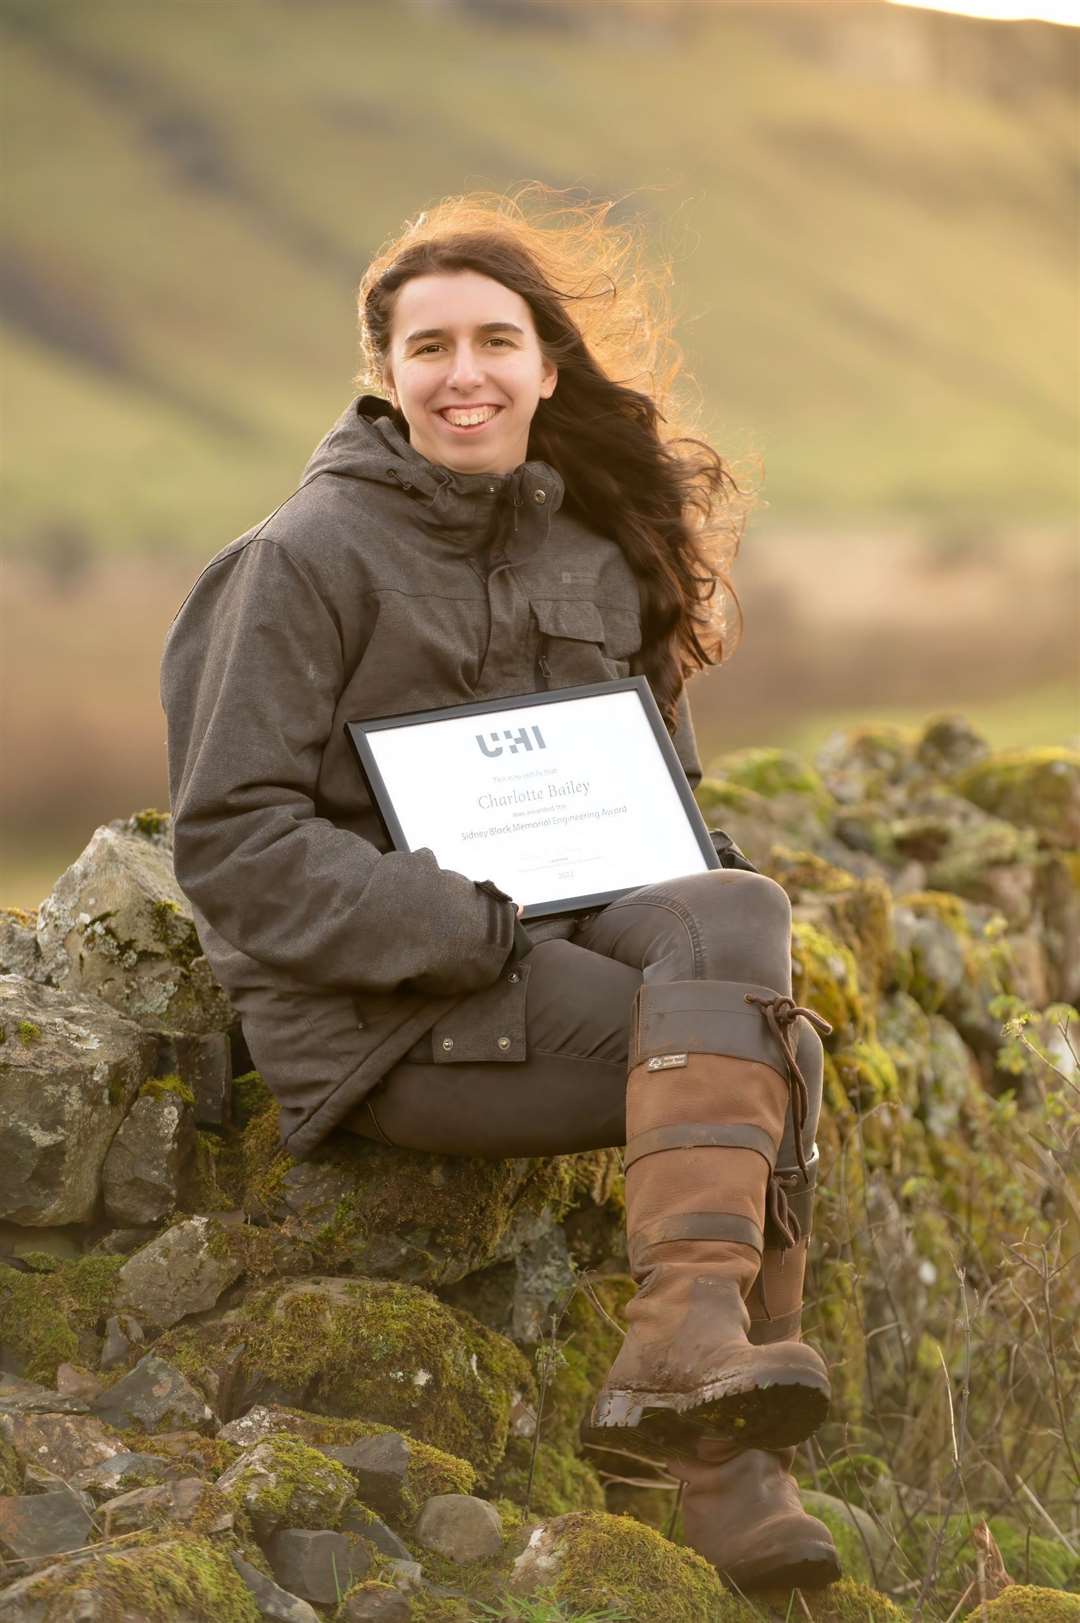 Charlotte Bailey has been awarded two scholarships for her efforts at UHI Inverness.